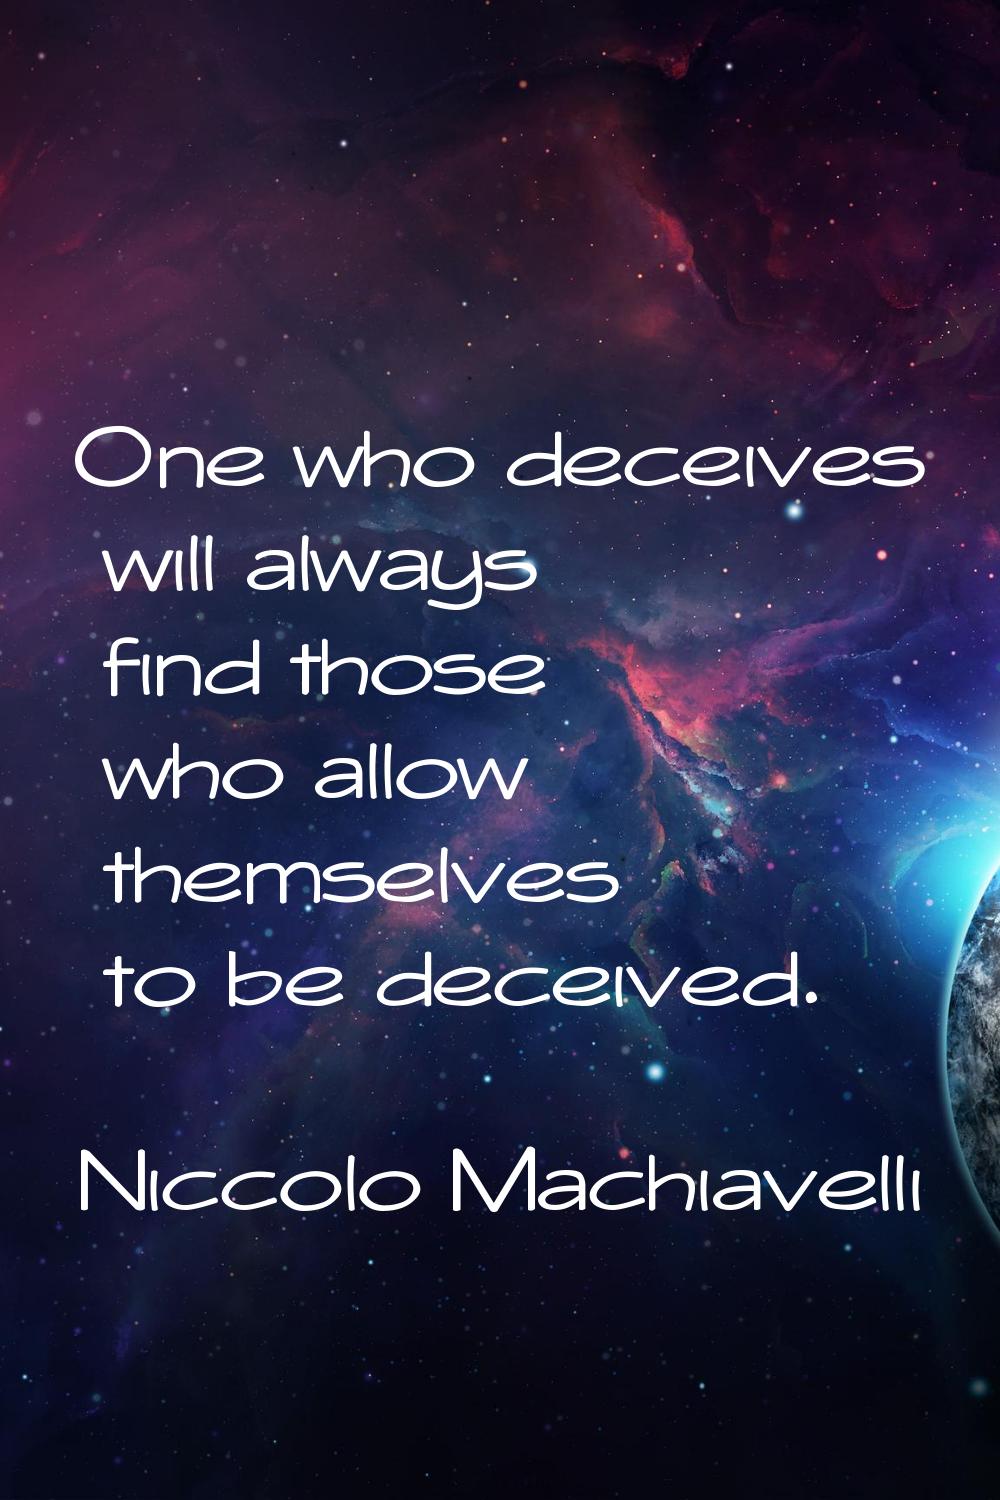 One who deceives will always find those who allow themselves to be deceived.